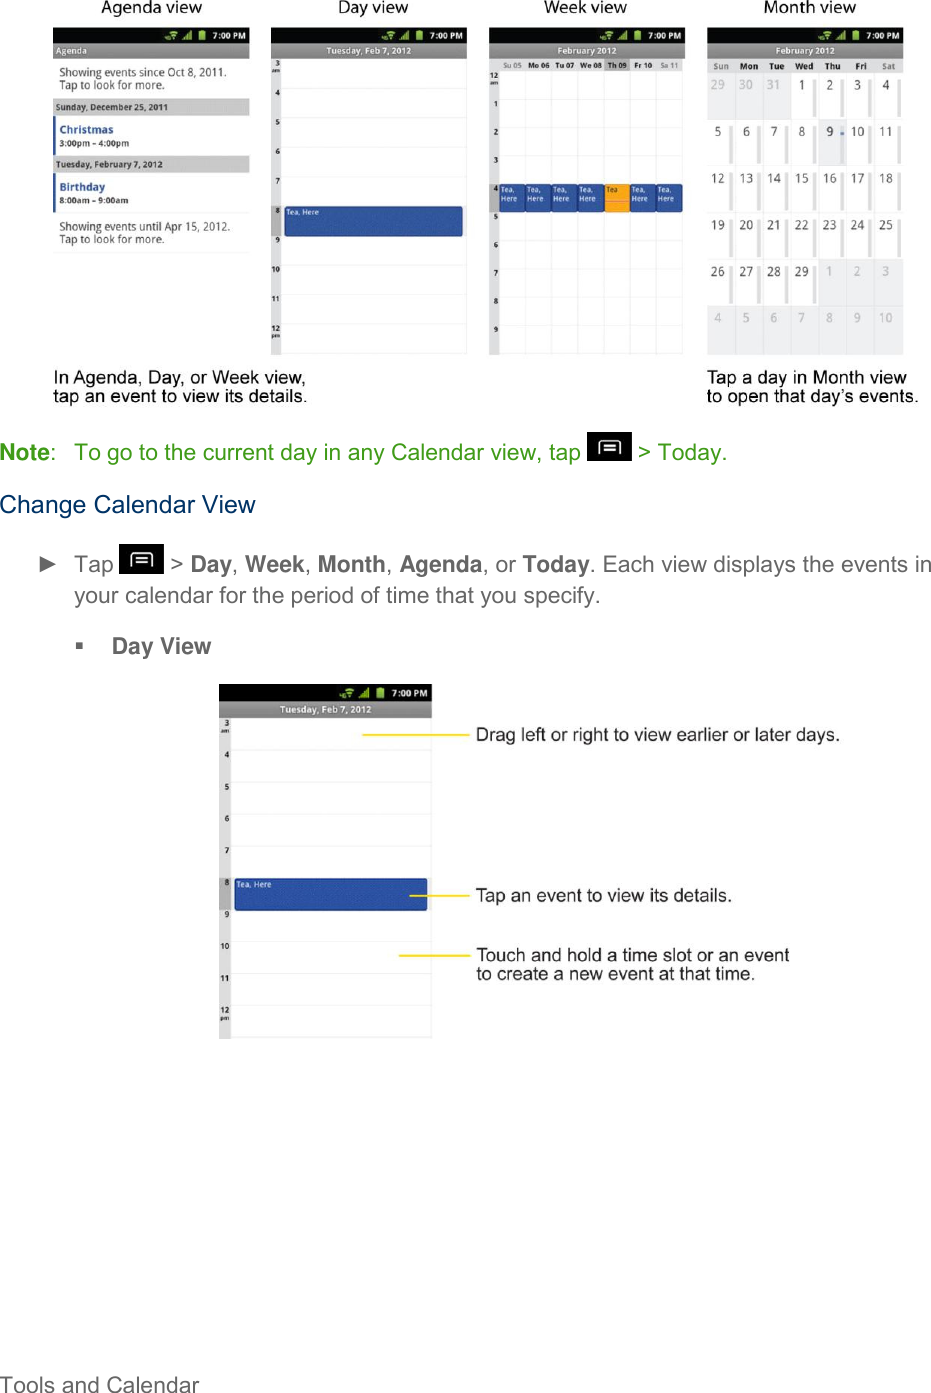  Tools and Calendar      Note:   To go to the current day in any Calendar view, tap   &gt; Today. Change Calendar View ►  Tap   &gt; Day, Week, Month, Agenda, or Today. Each view displays the events in your calendar for the period of time that you specify.  Day View     